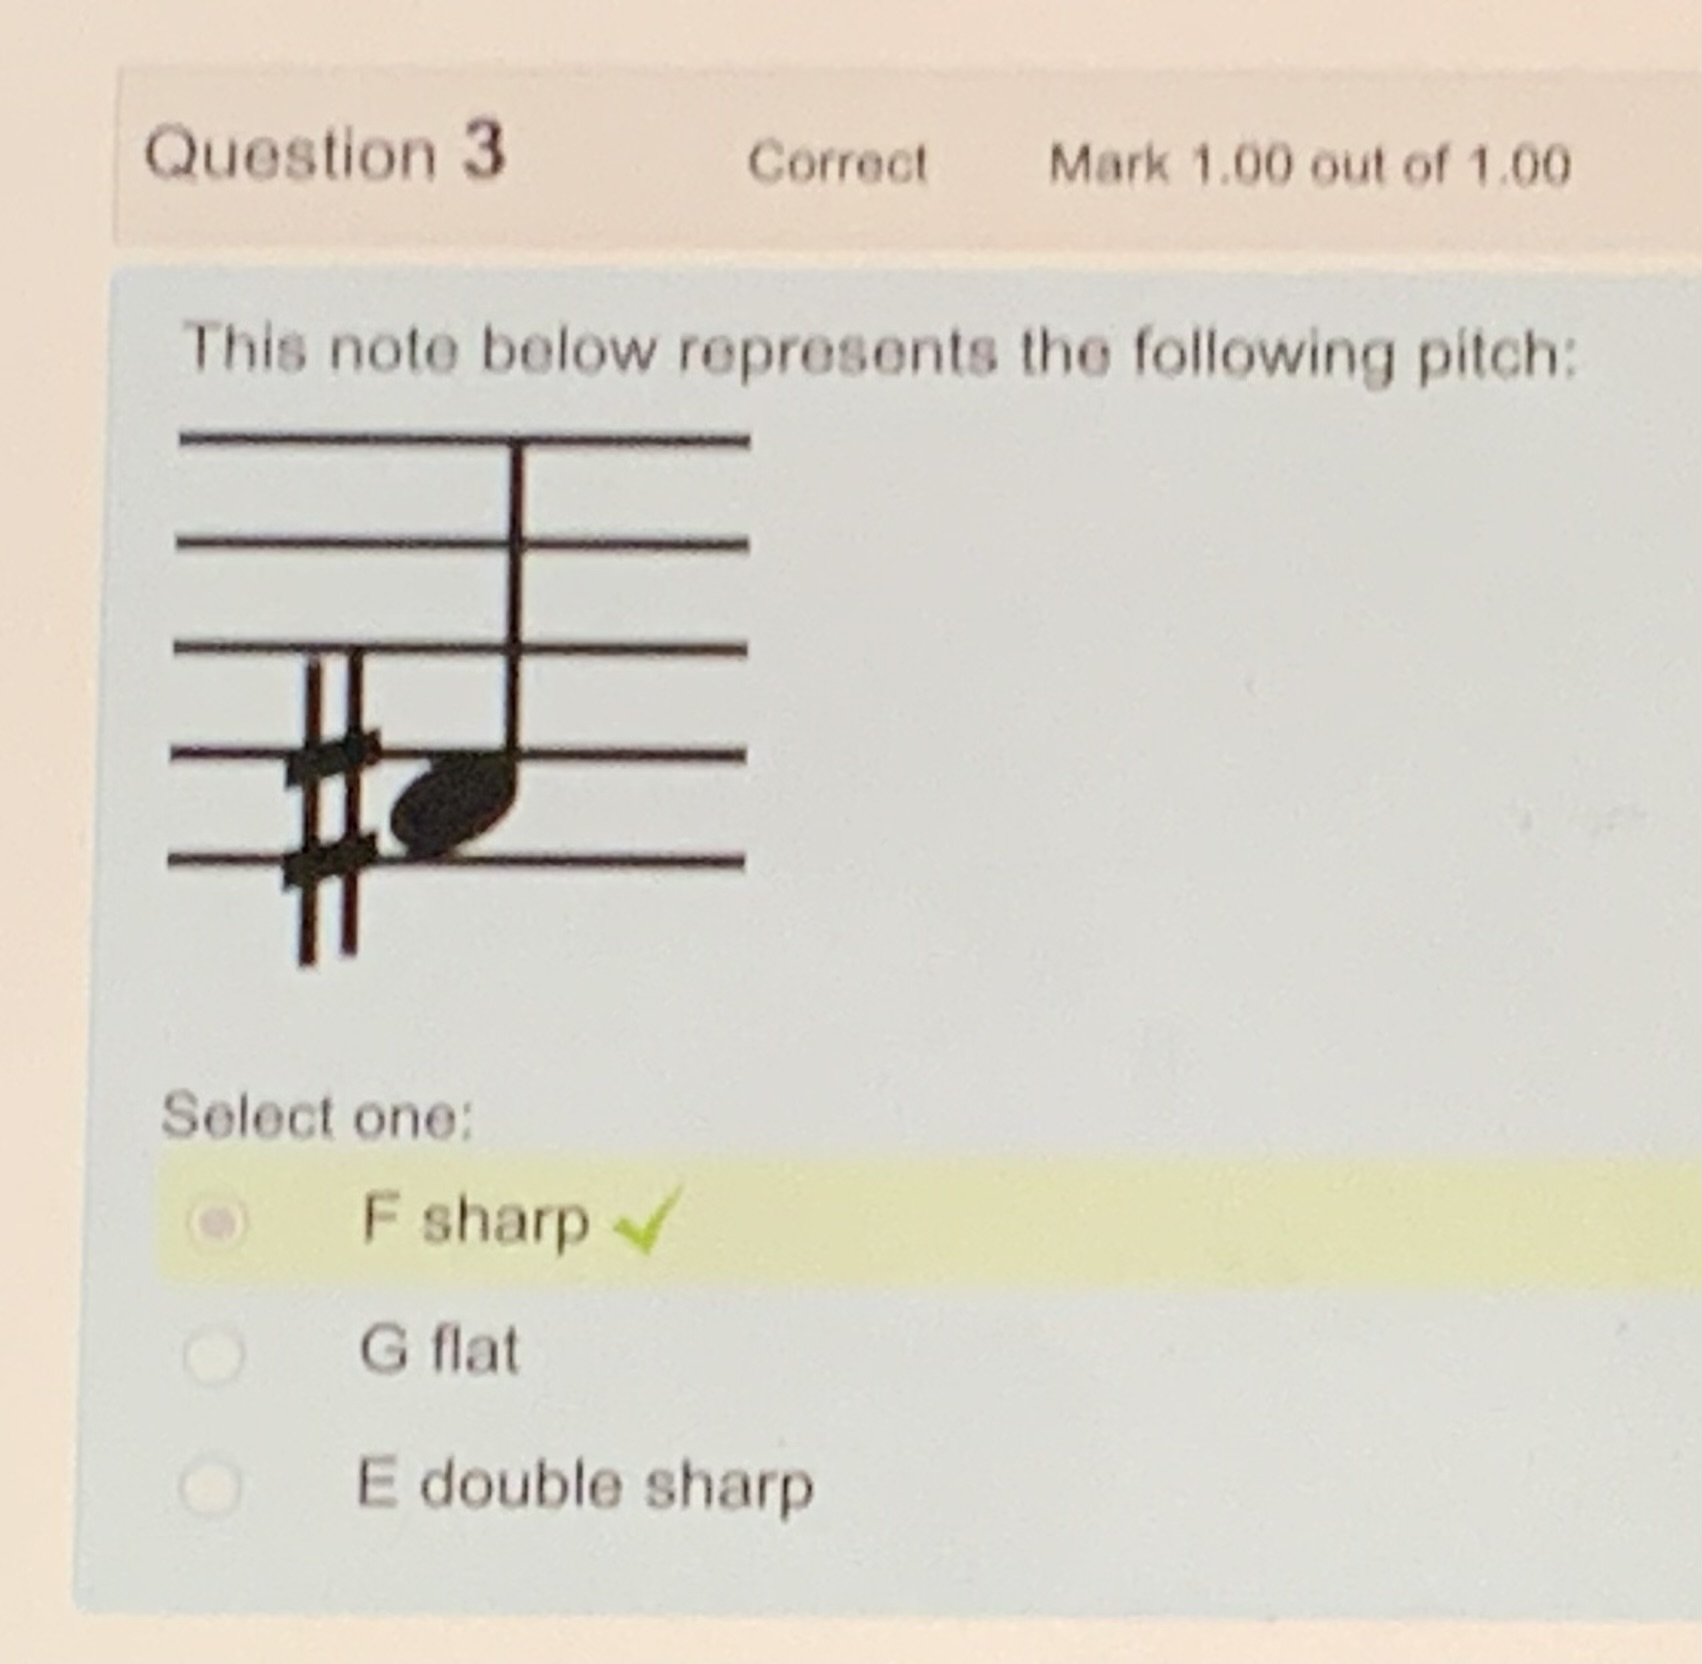 <p>The note below represents the following pitch:</p>